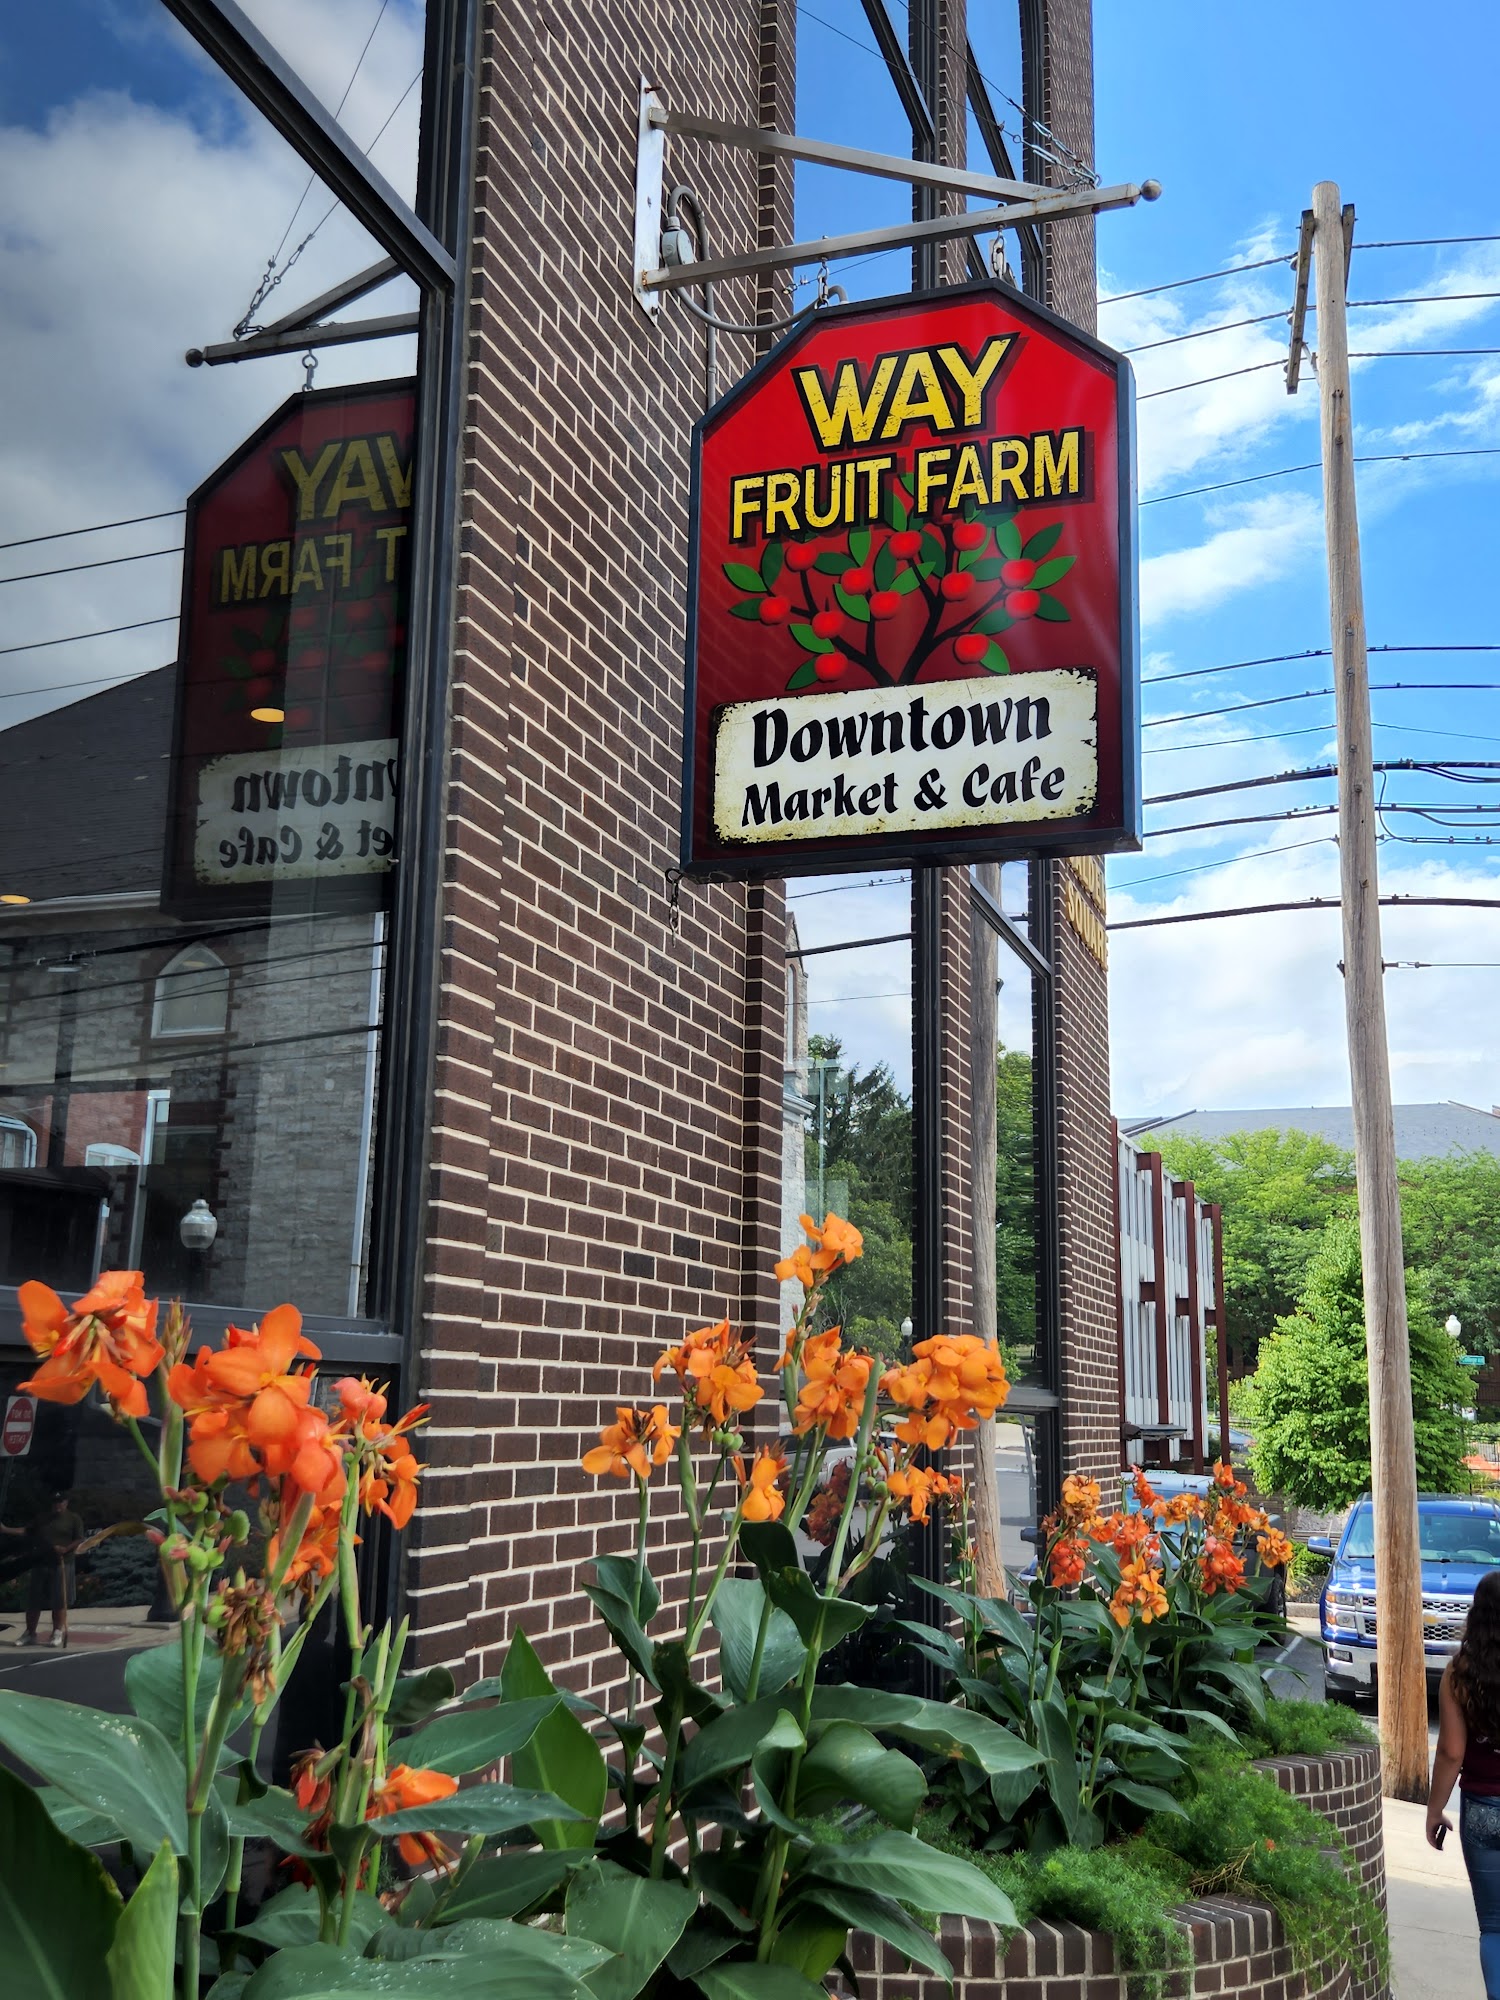 Way Fruit Farm Downtown Market and Cafe